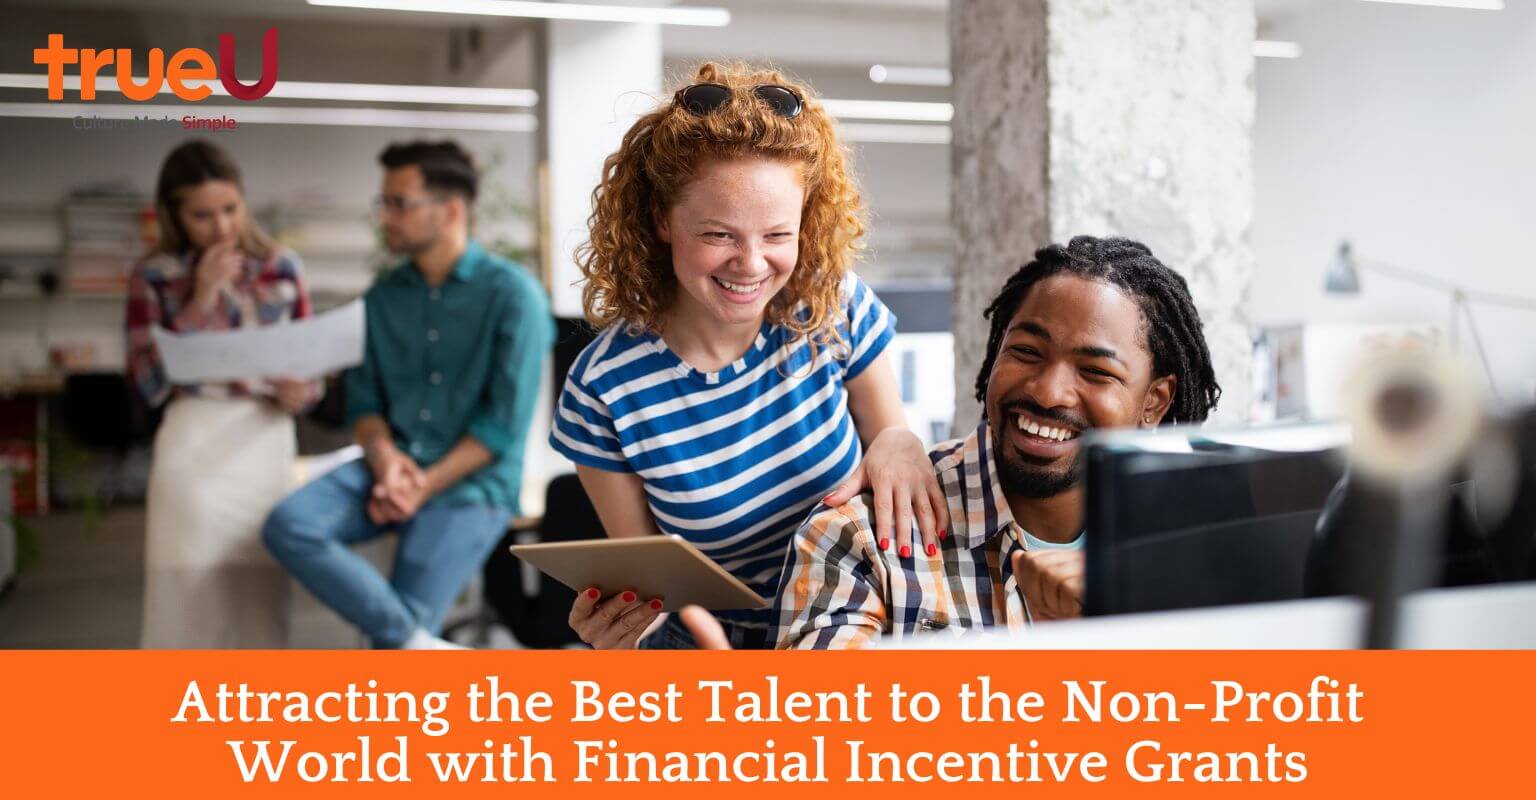 Attracting the Best Talent to the Non-Profit World with Financial Incentive Grants